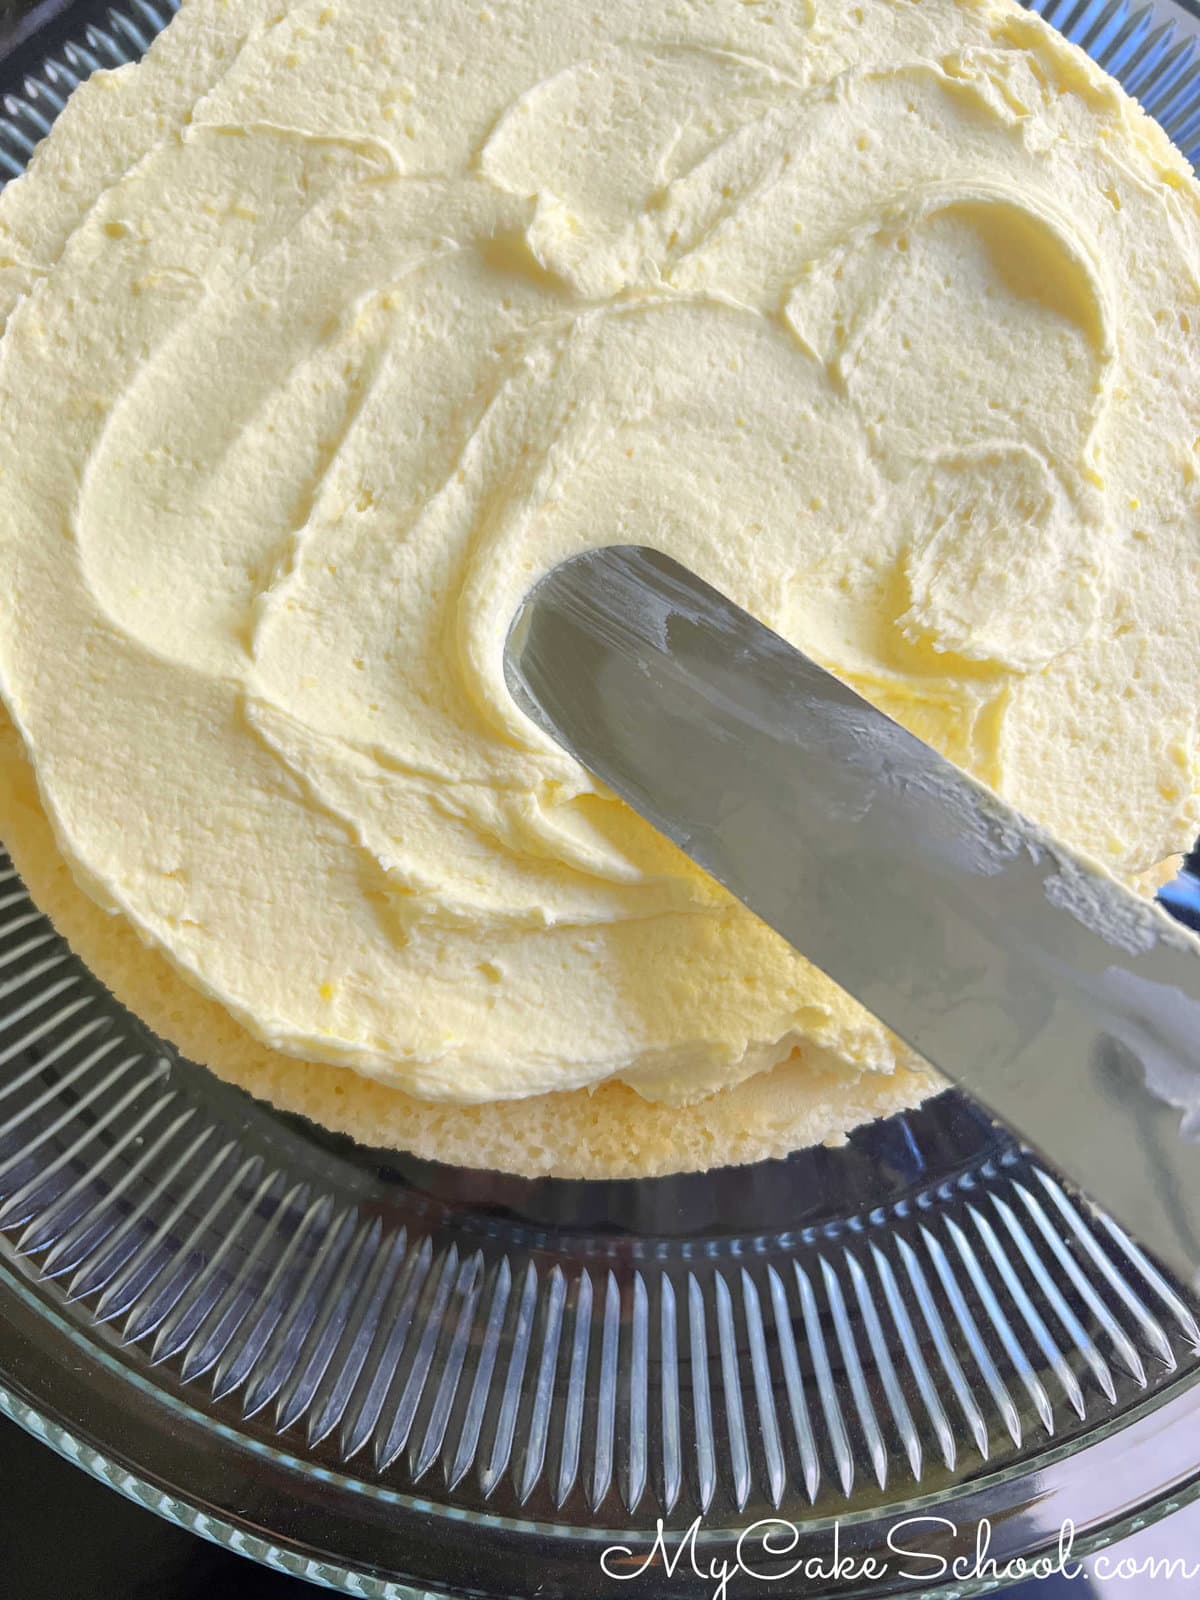 Applying the lemon cream filling to the top of the first cake layer with a spatula, as the cake is being assembled